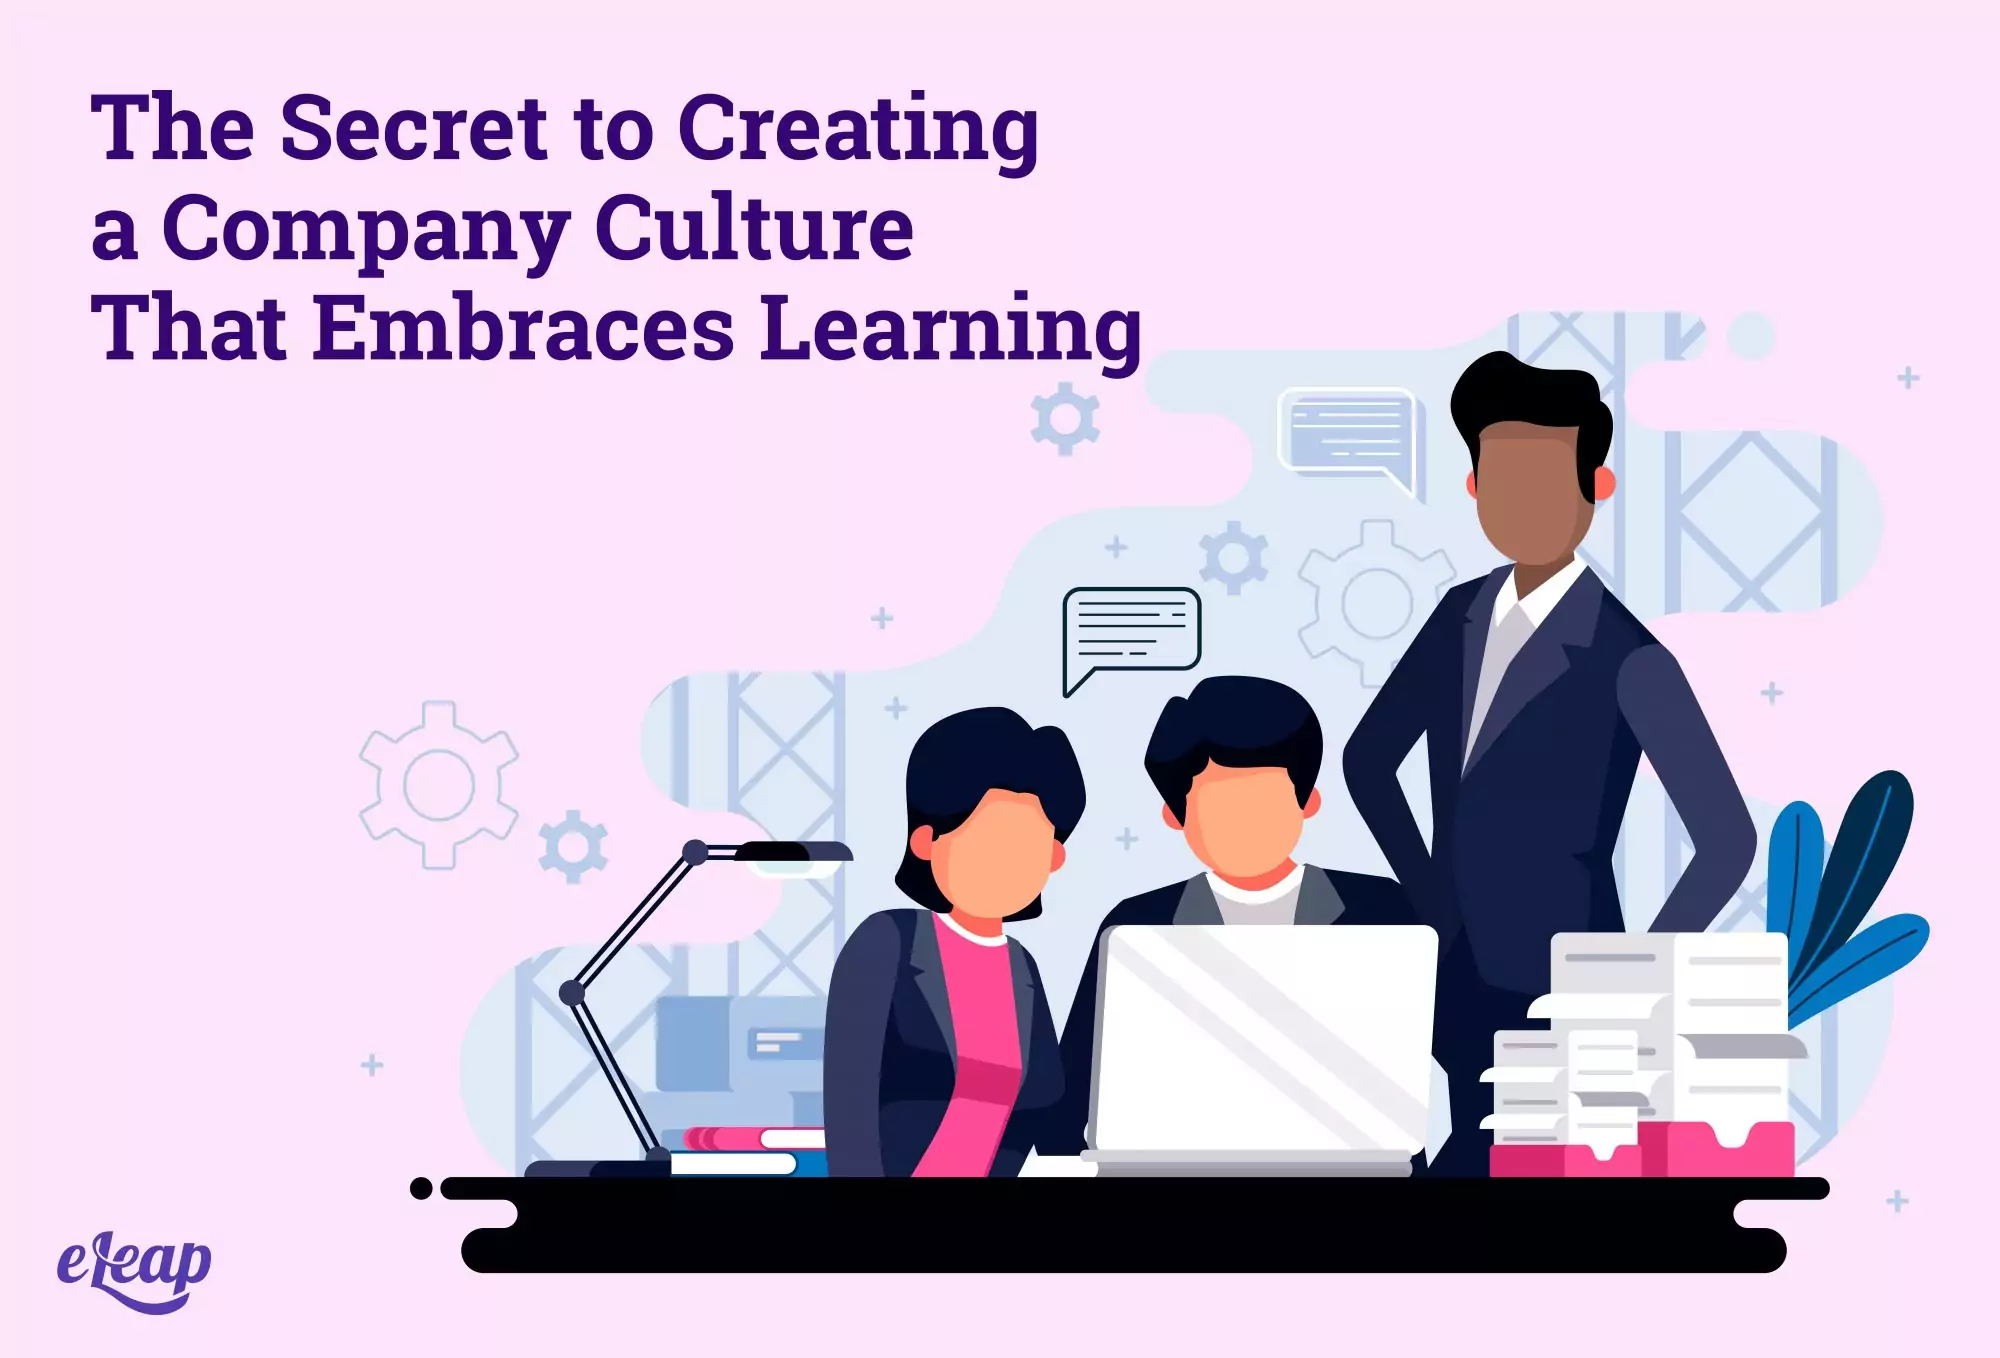 The Secret to Creating a Company Culture That Embraces Learning